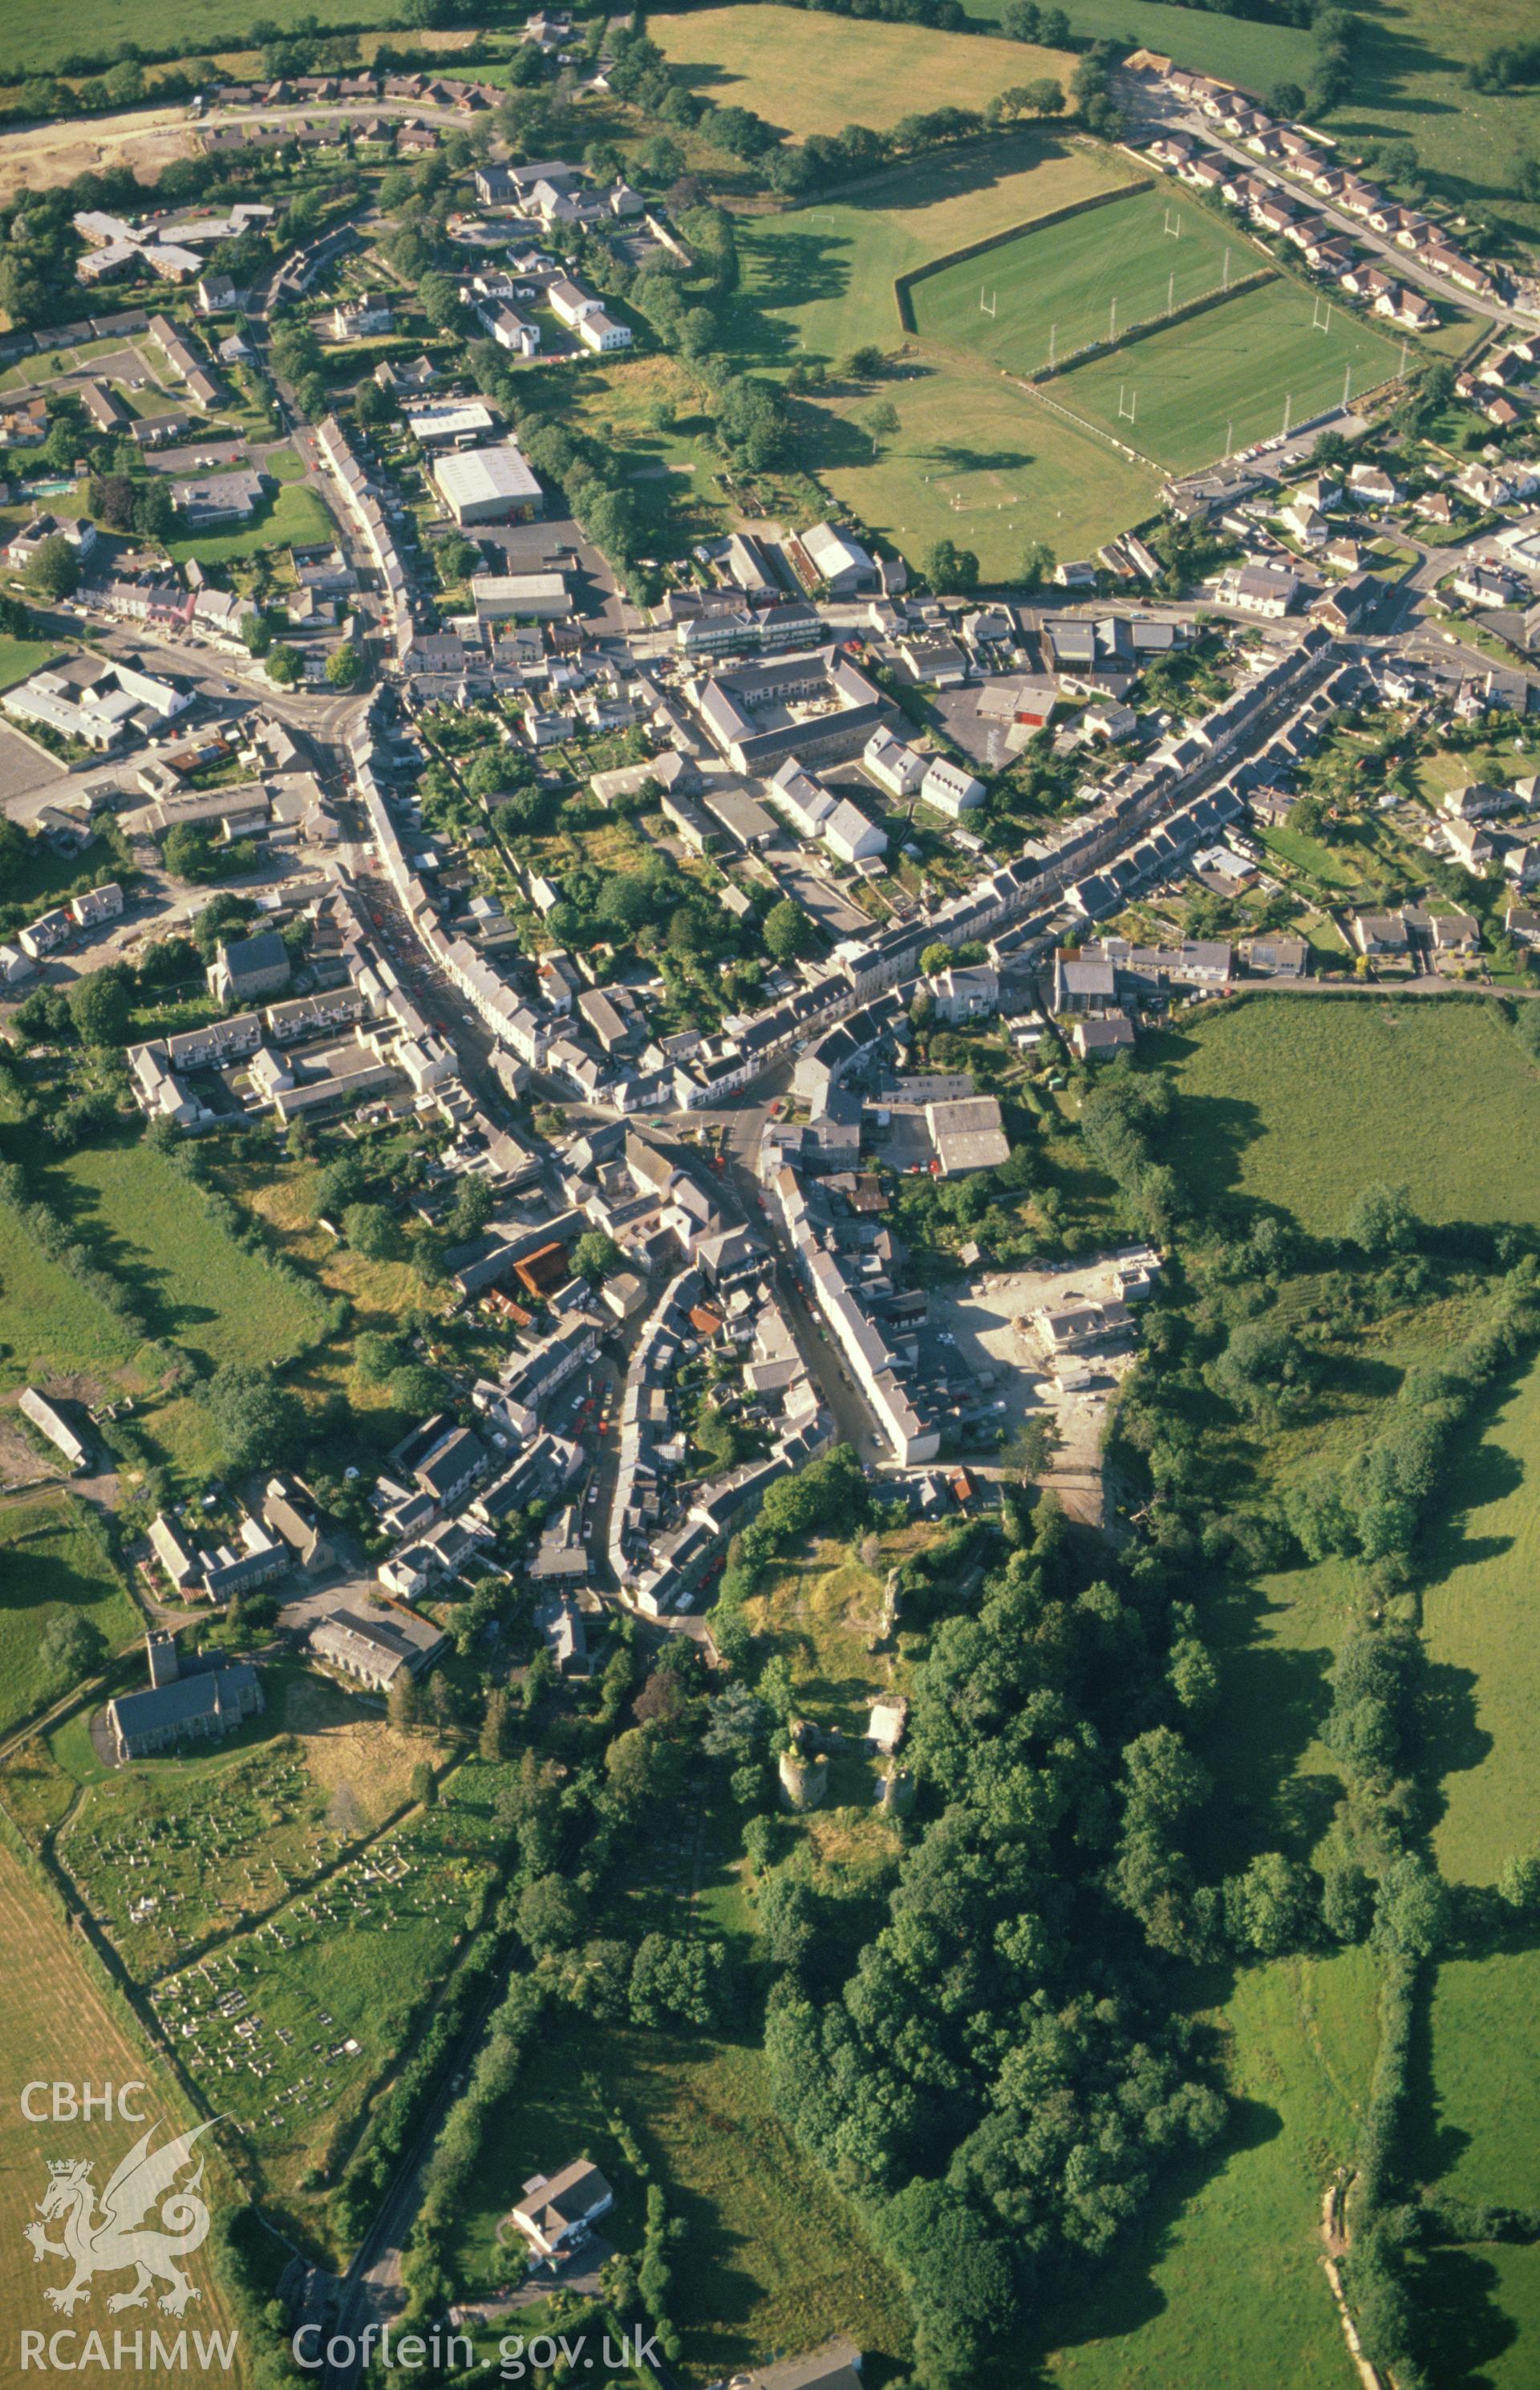 Slide of RCAHMW colour oblique aerial photograph of Narberth, taken by C.R. Musson, 2/8/1988.